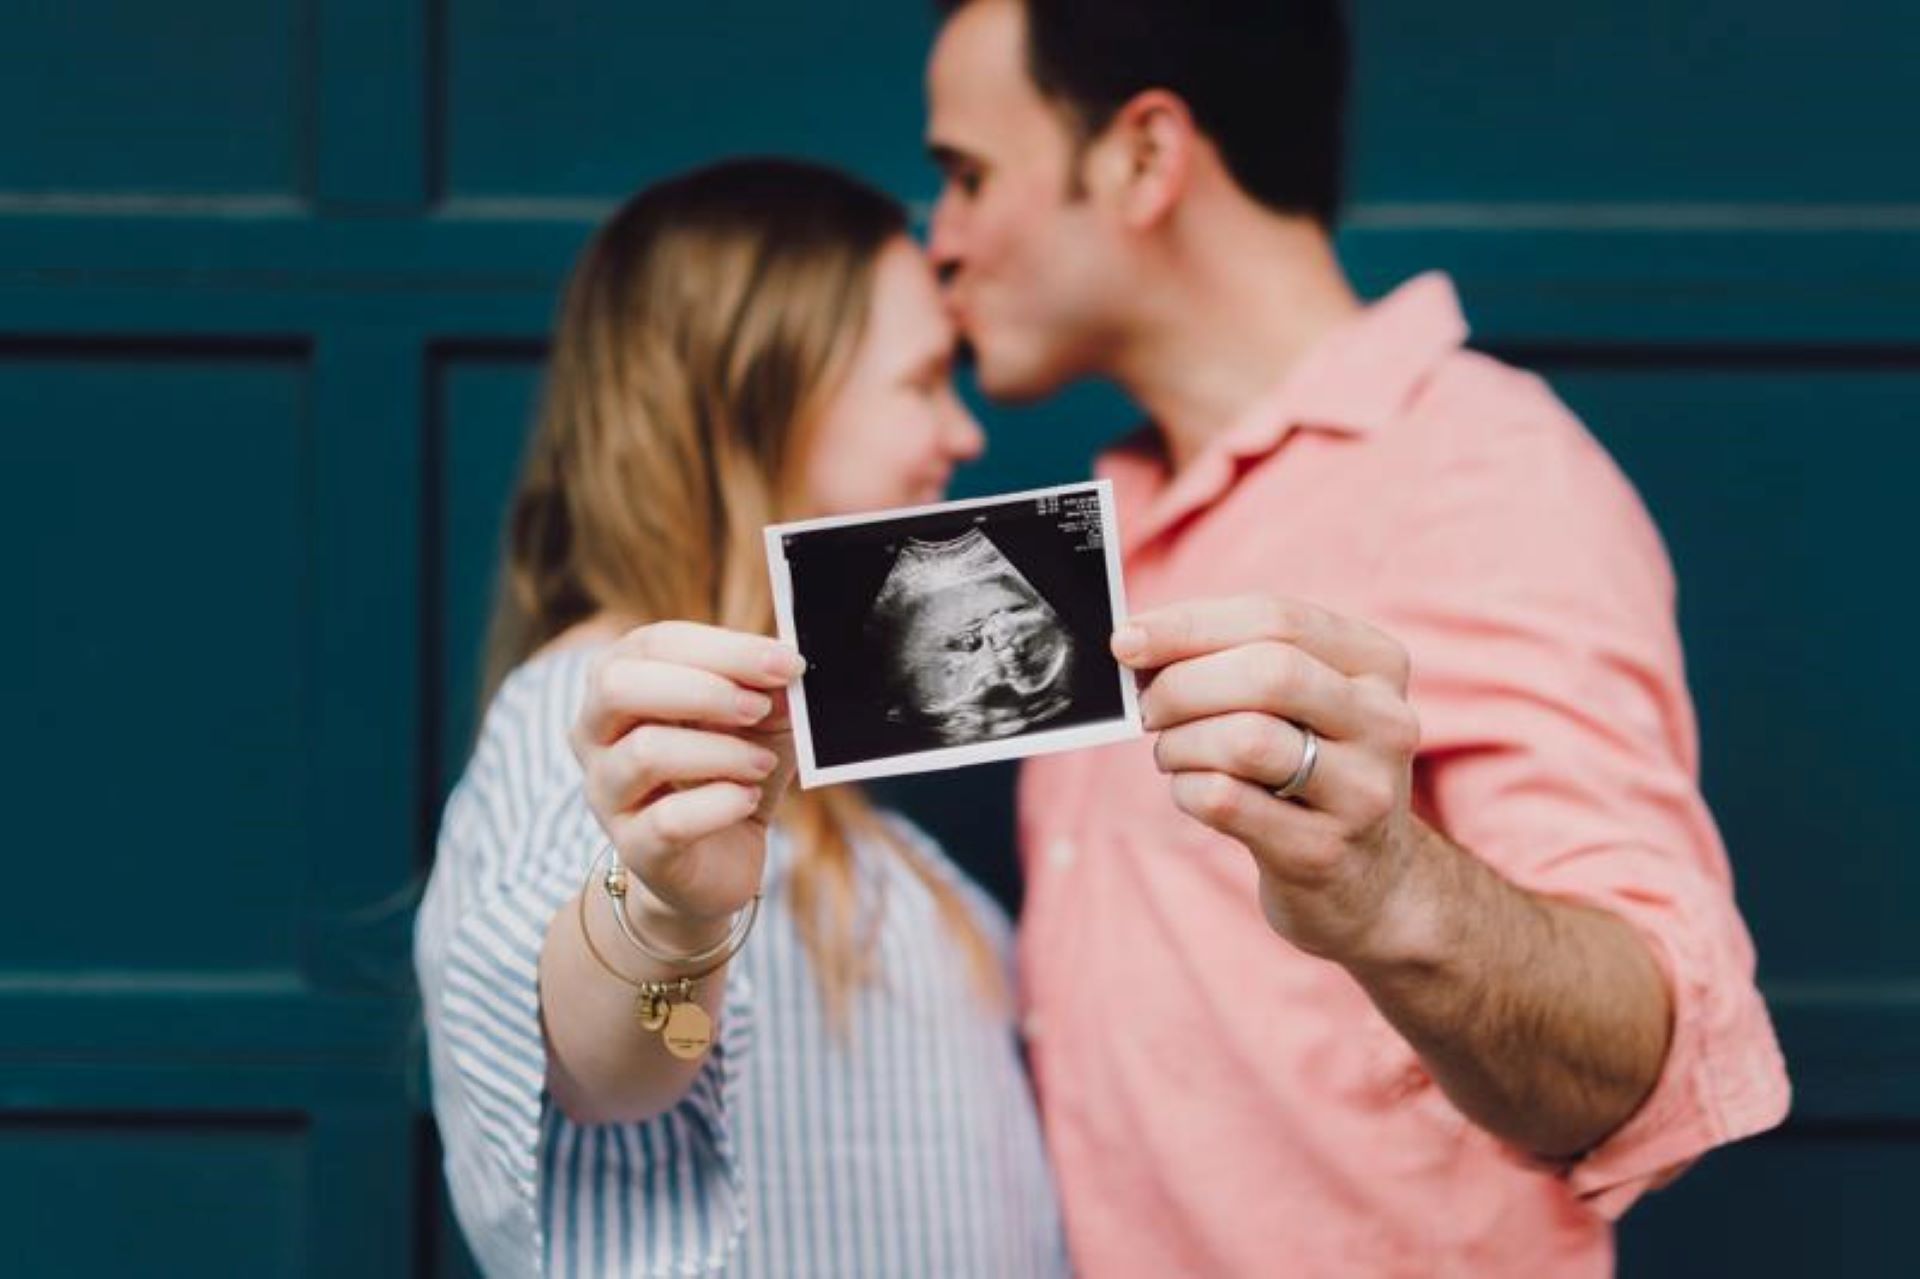 Parents to be hold out ultrasound image of baby